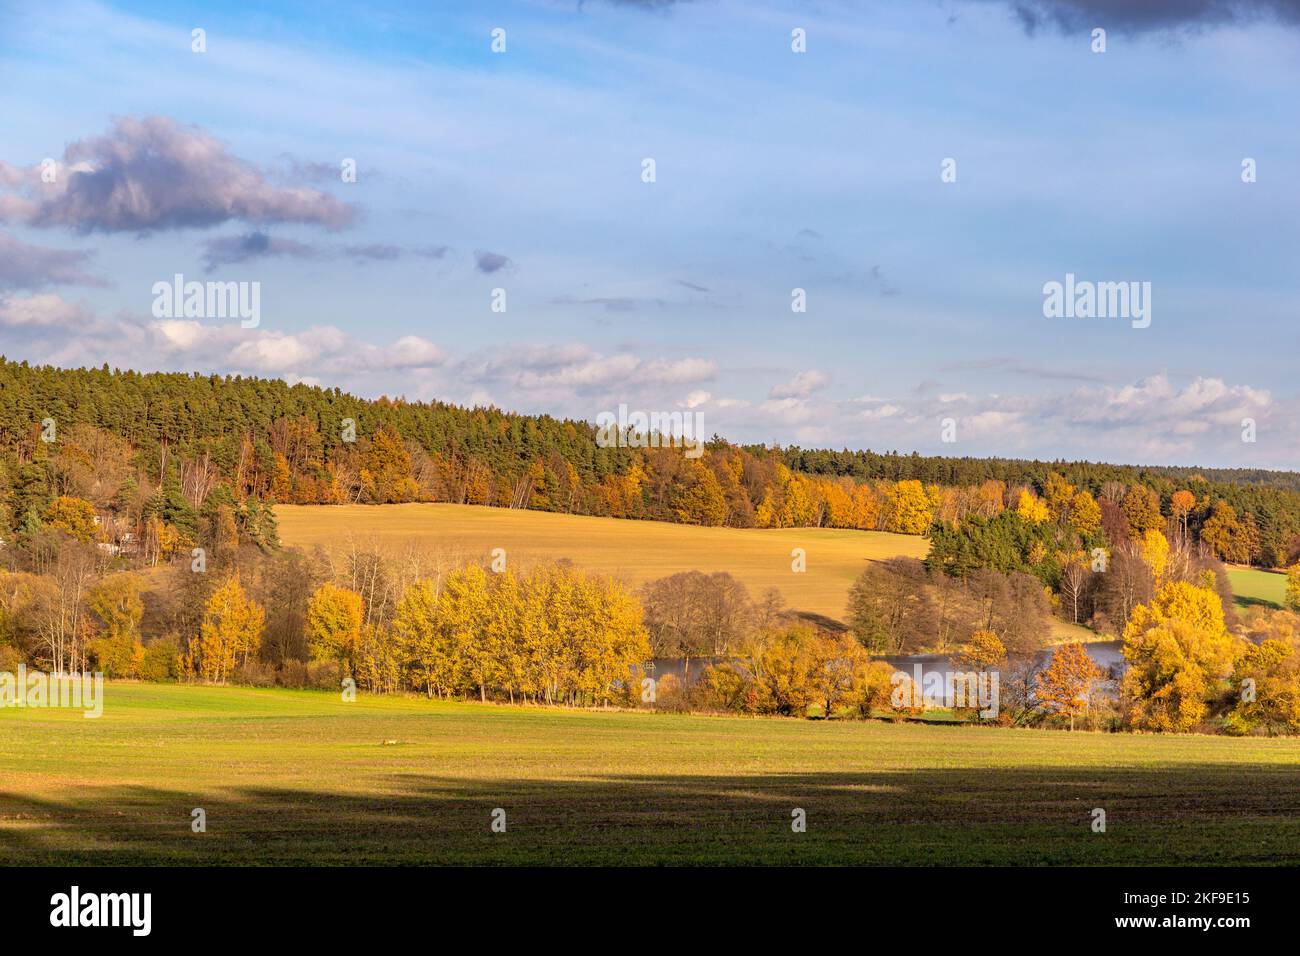 Sunny november day in the countryside. Autumn landscape. Stock Photo